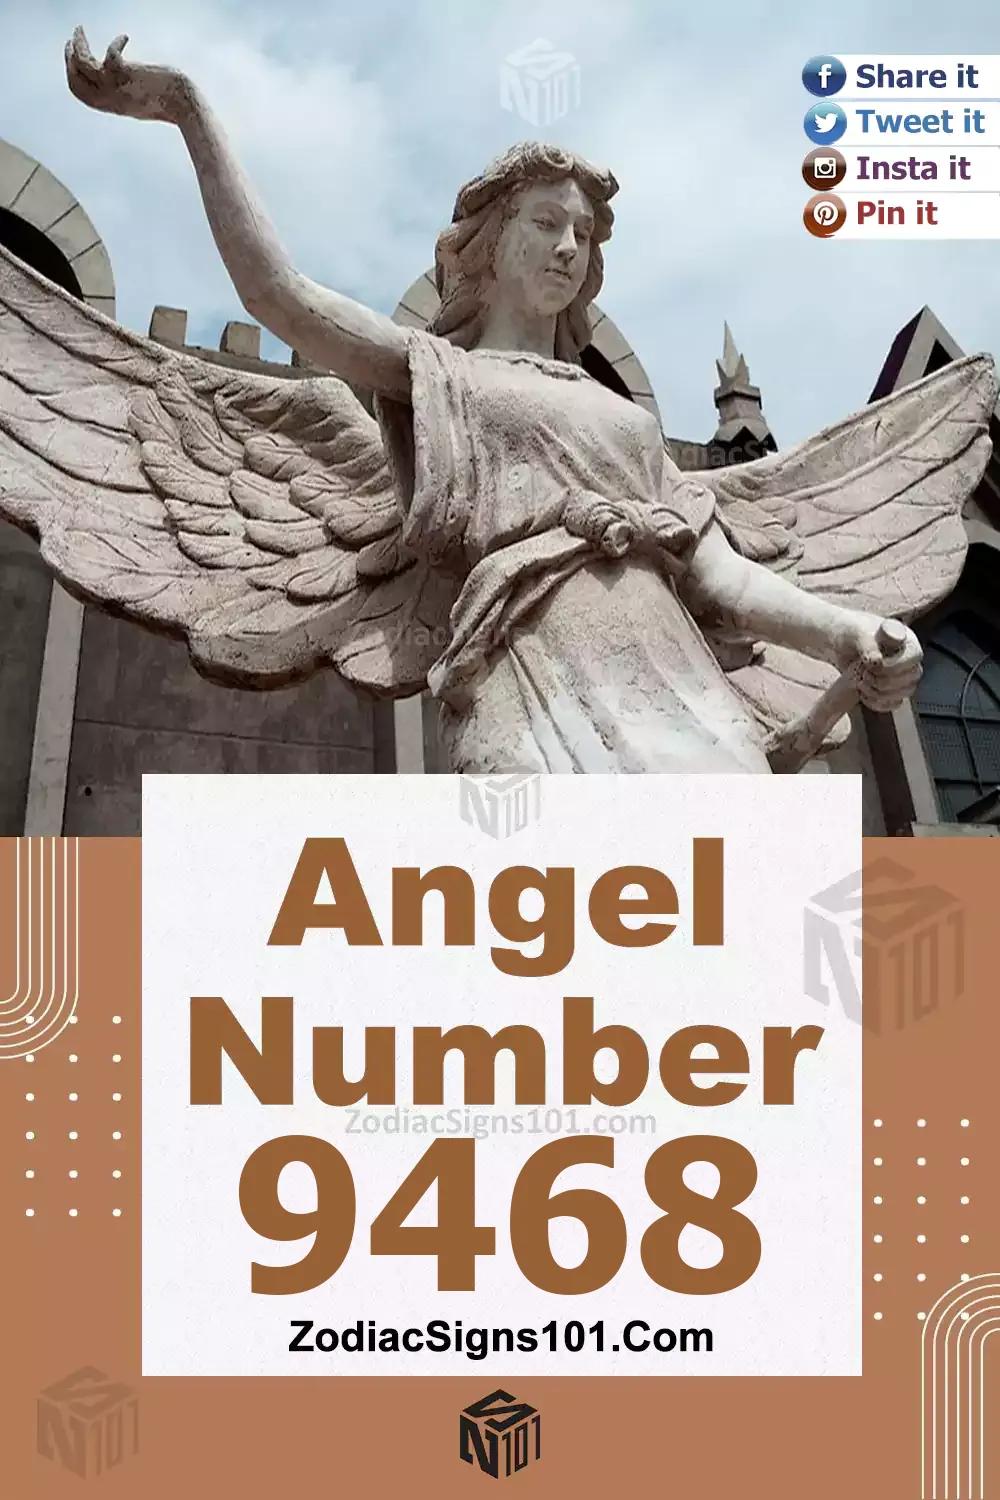 9468 Angel Number Meaning